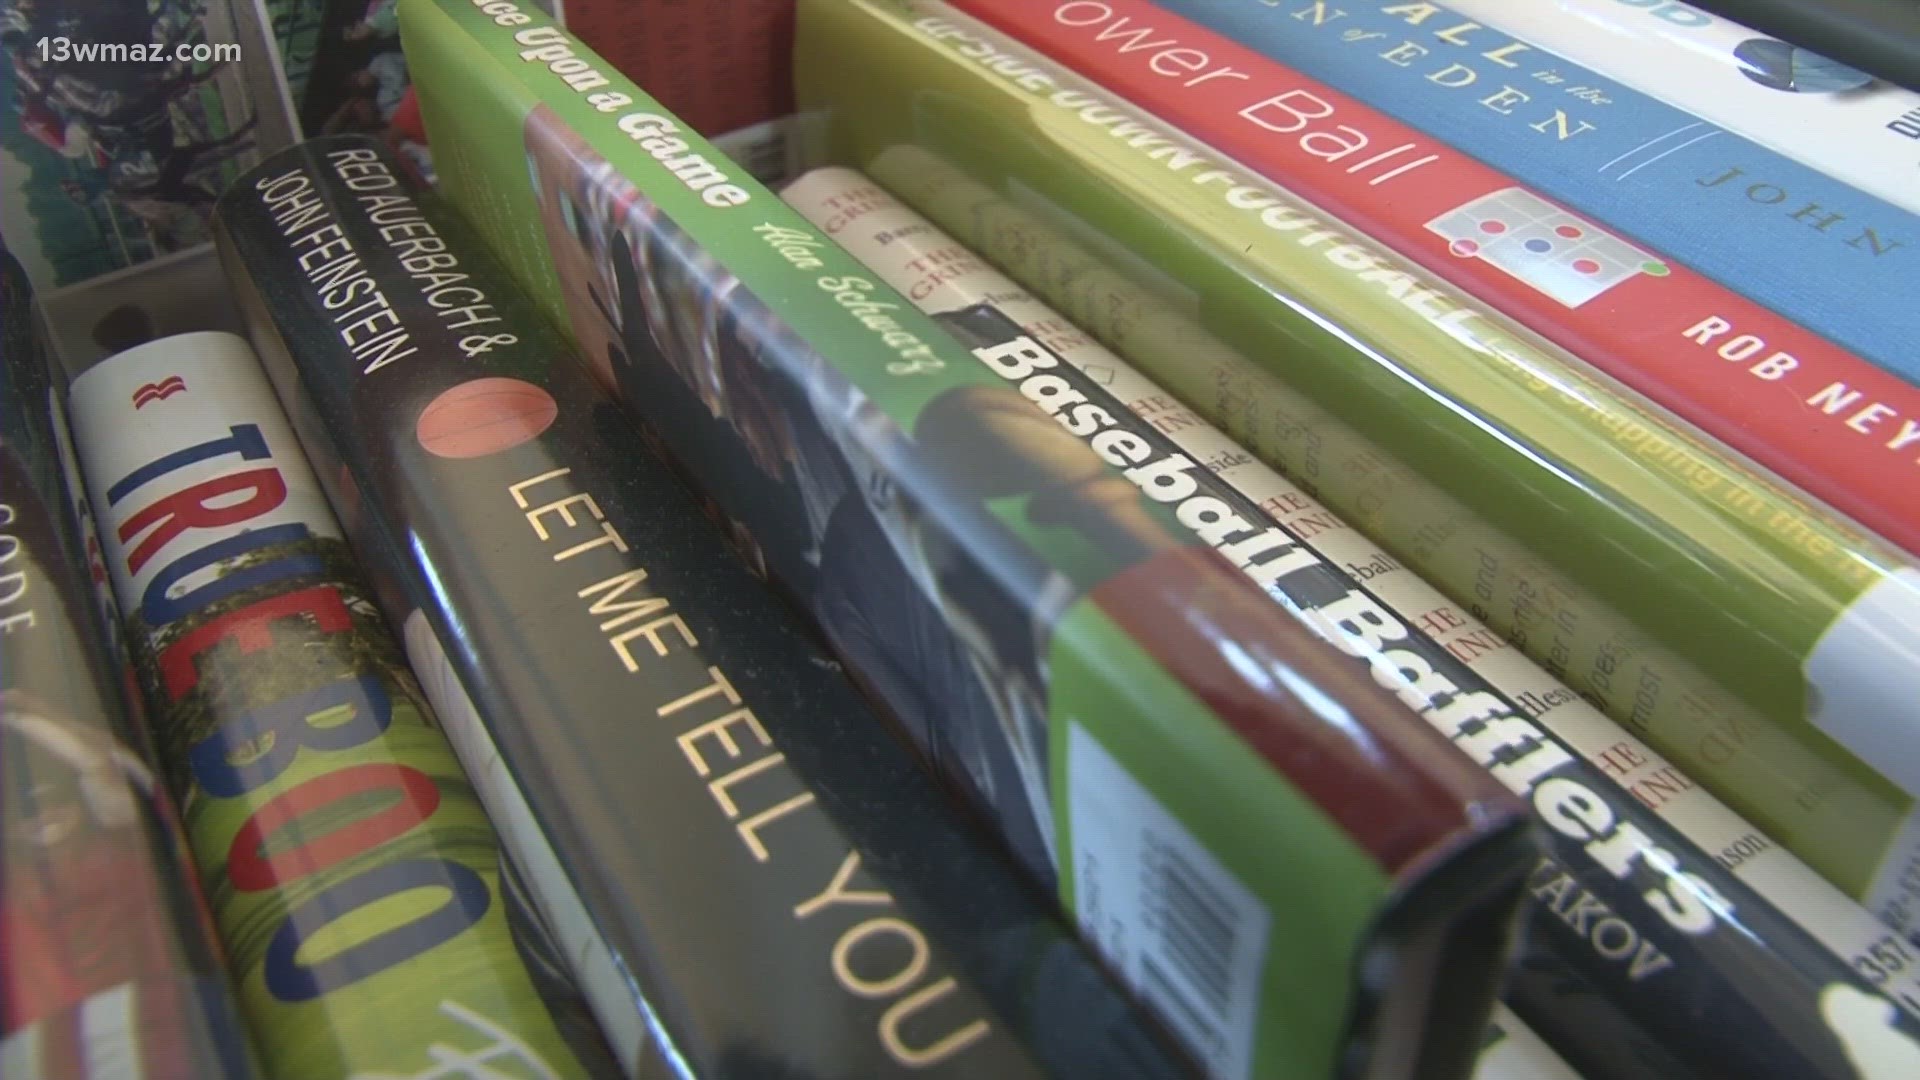 This weekend, you'll find bins of bountiful books at the annual Friends of the Library Sale in Macon.